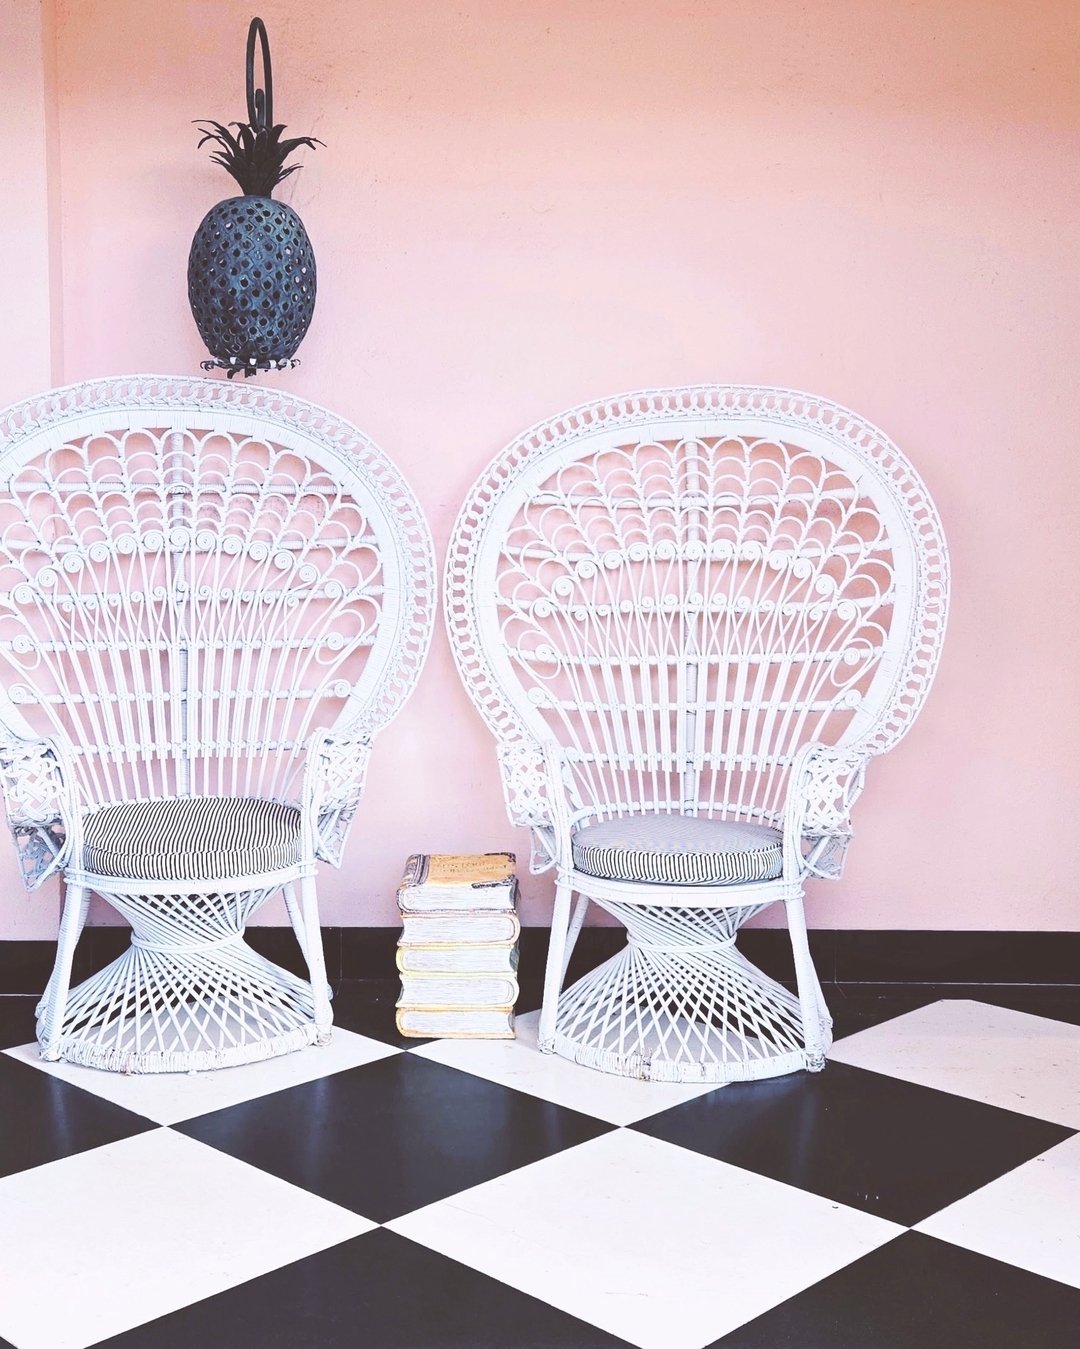 Sitting Pretty on a Saturday Morning🩷🤍🖤

Love, love this composition of the graphic, classic black &amp; white tile floor, the whimsical Victorian wicker chairs, a delicious pineapple lantern🍍&amp; walls that make me blush. Art Deco &amp; Gilded 